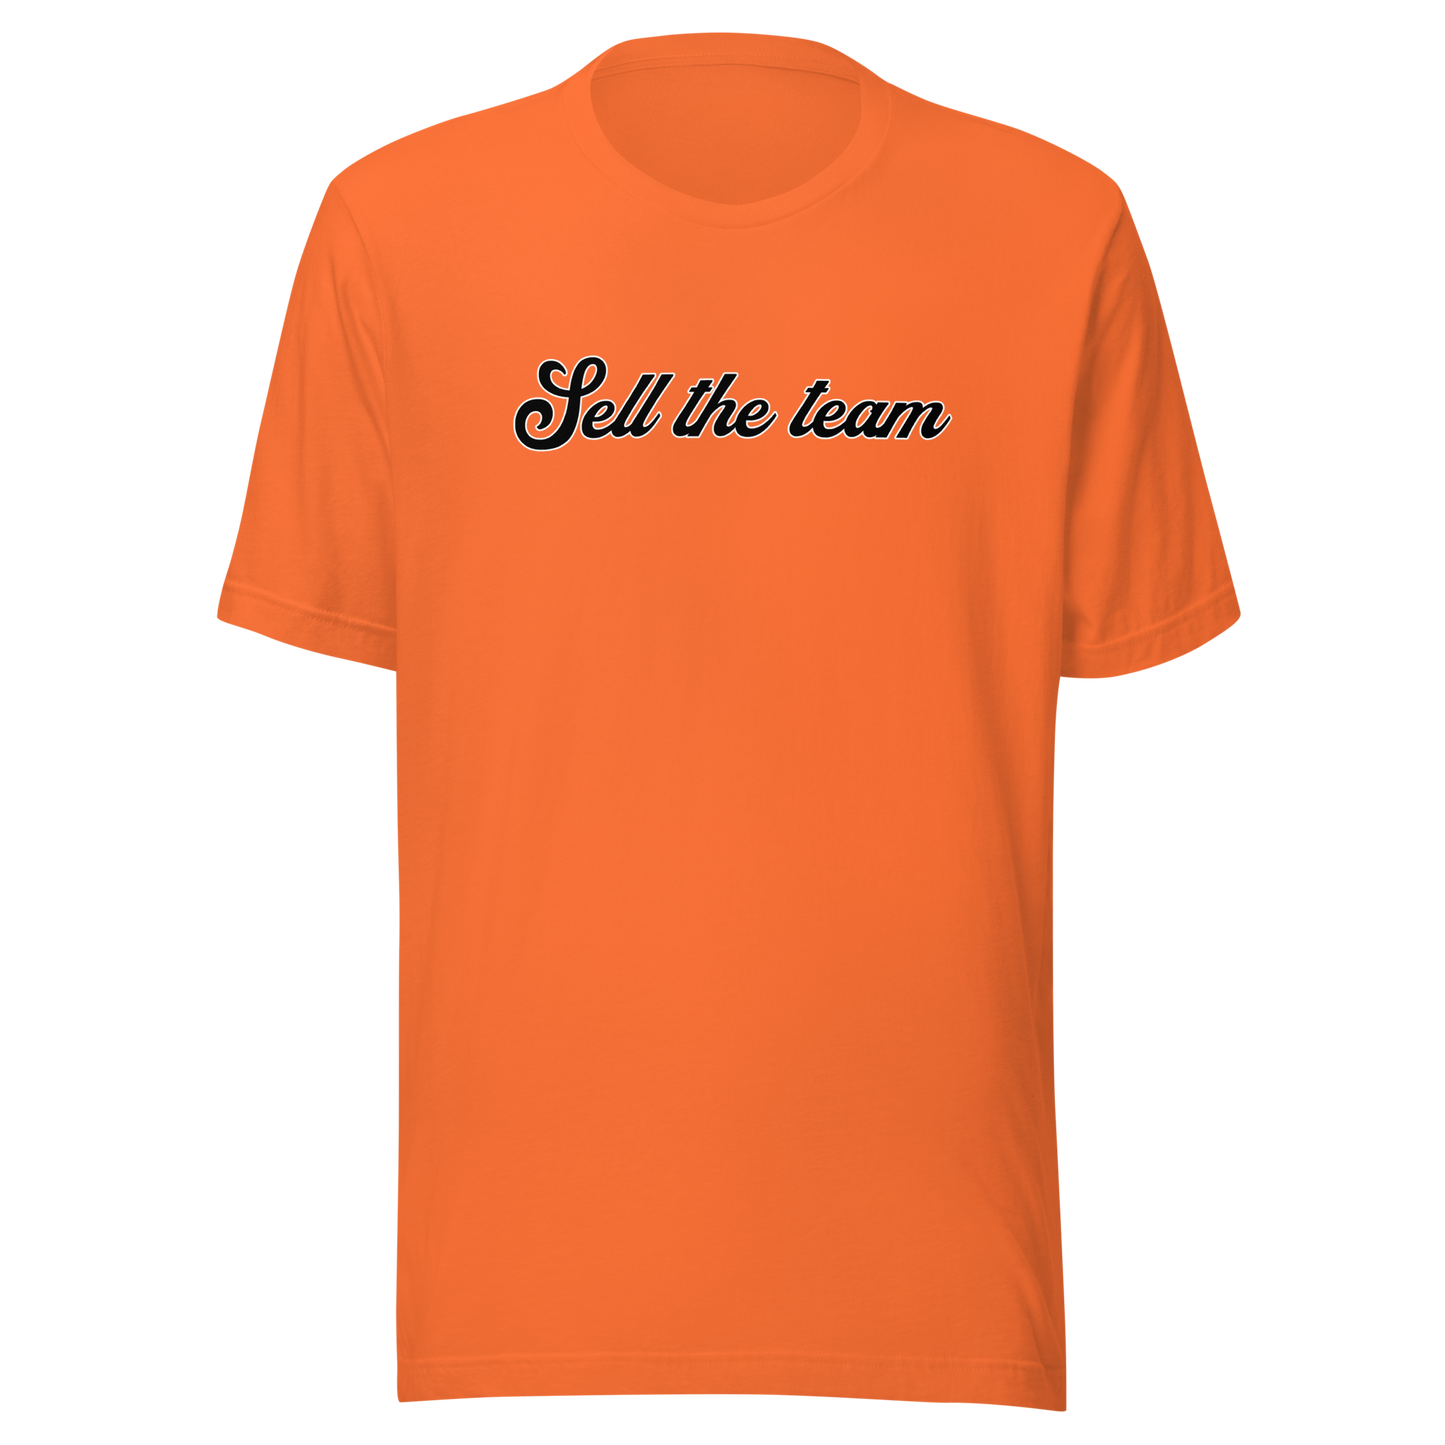 Sell the Team Baltimore Unisex t-shirt